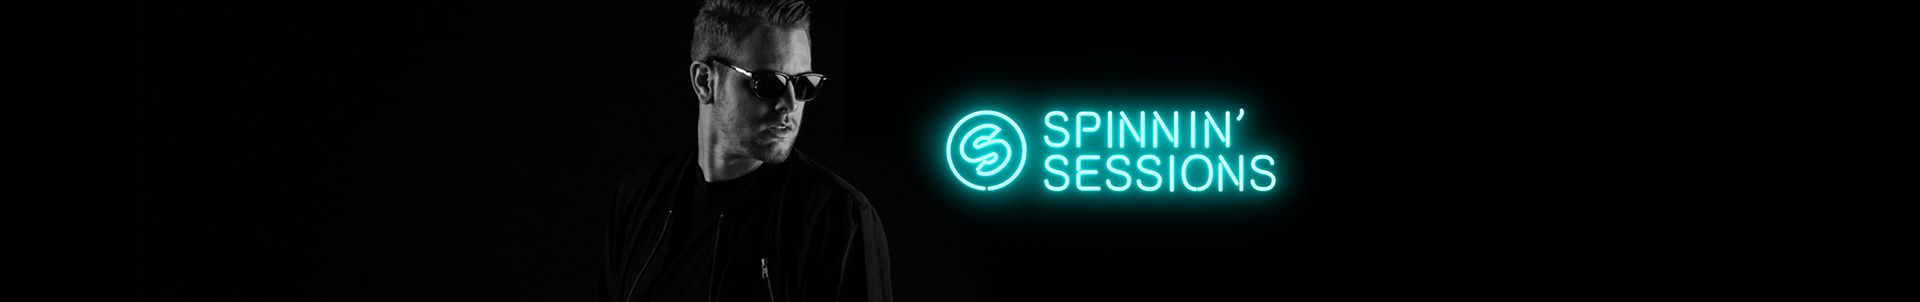 We Rave You premiere: Spinnin’ Sessions Radio Show with a guest mix by CMC$